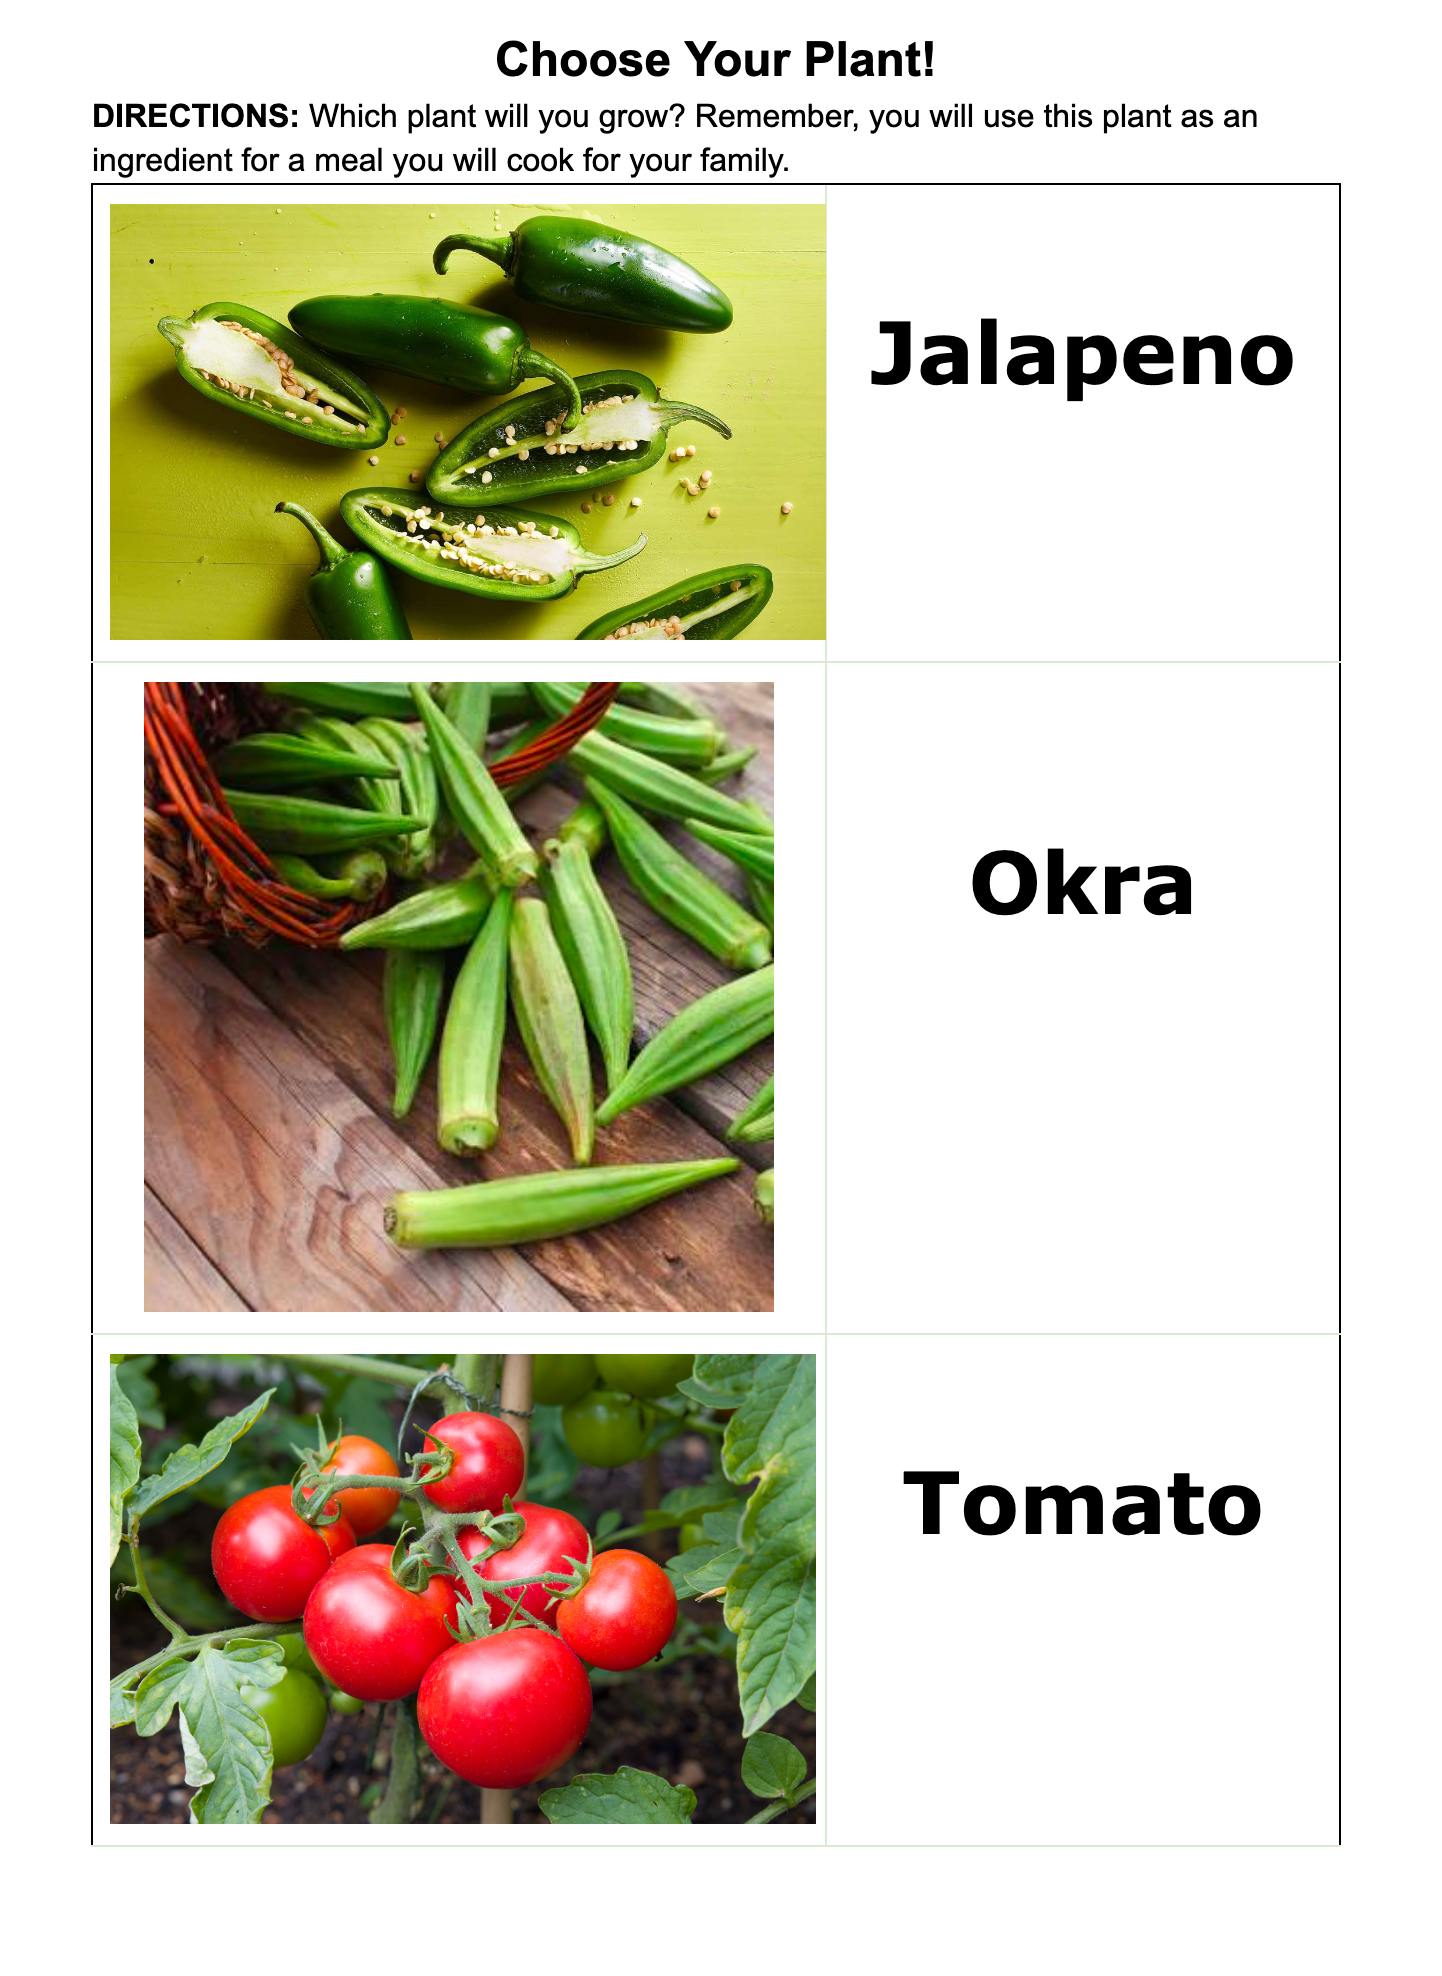 Edible Plants That Students Could Select For The Project